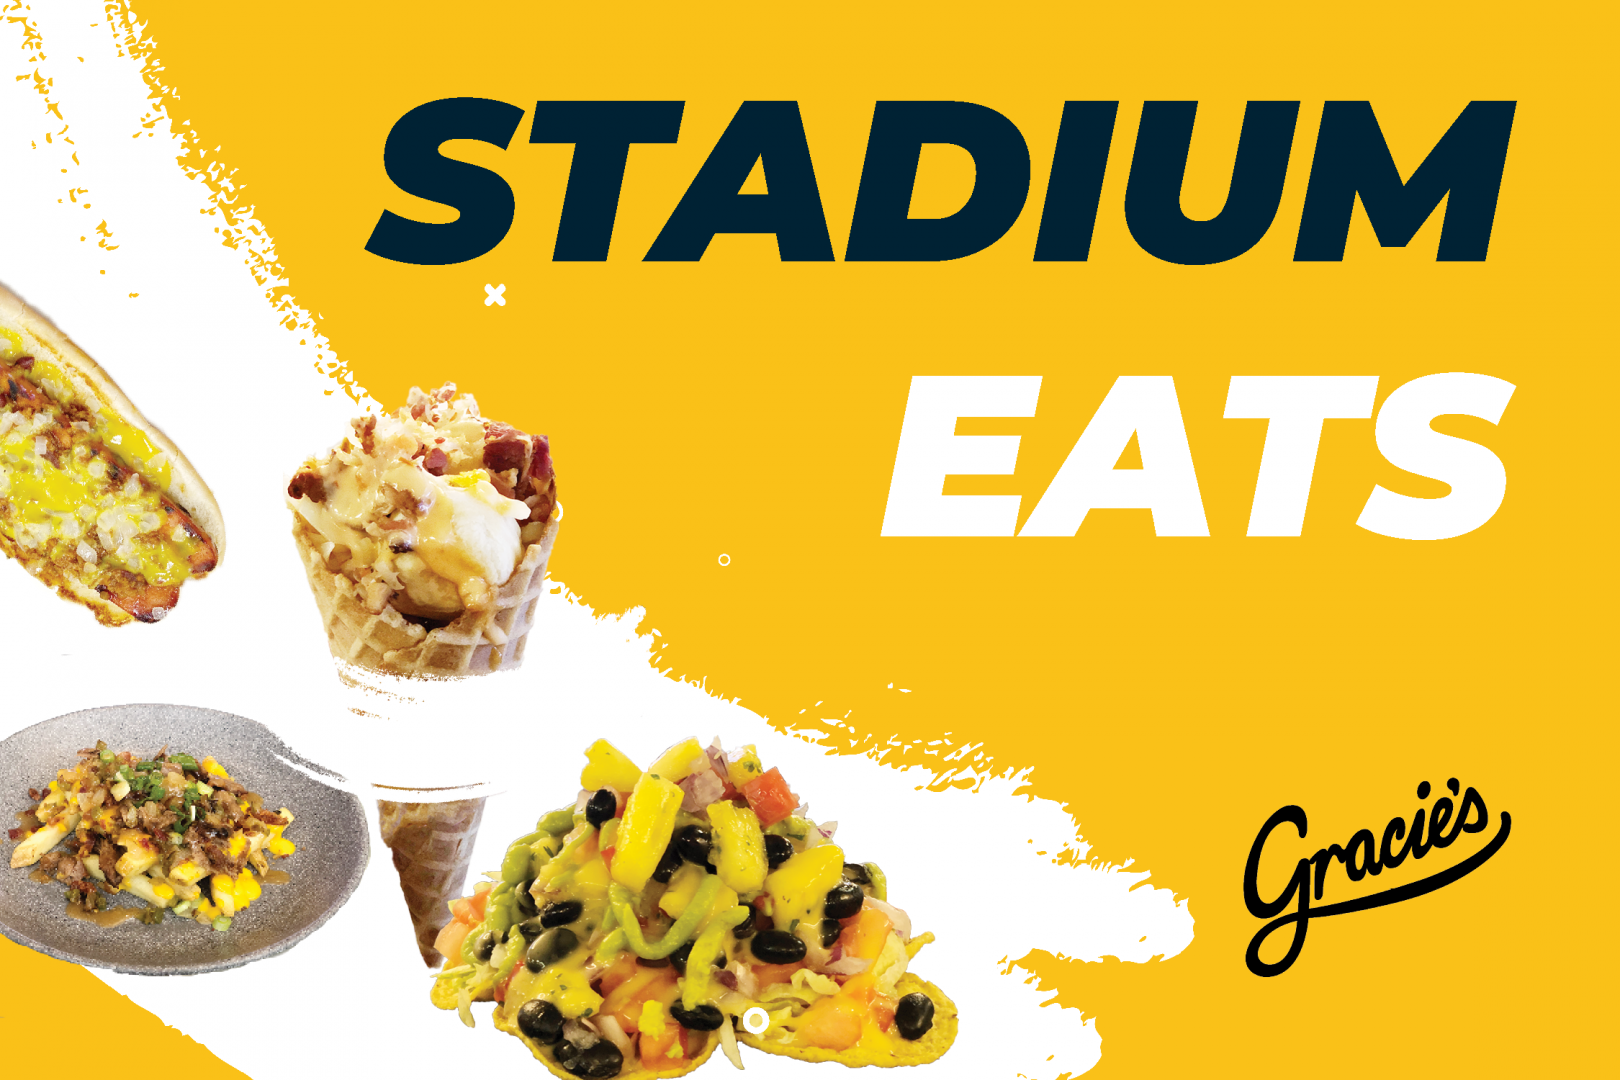 The picture has Yellow and white background with text mentioning " Stadium Eats" on the top right of the picture with  pictures of food items  and Gracie's  written on the bottom right of the picture.